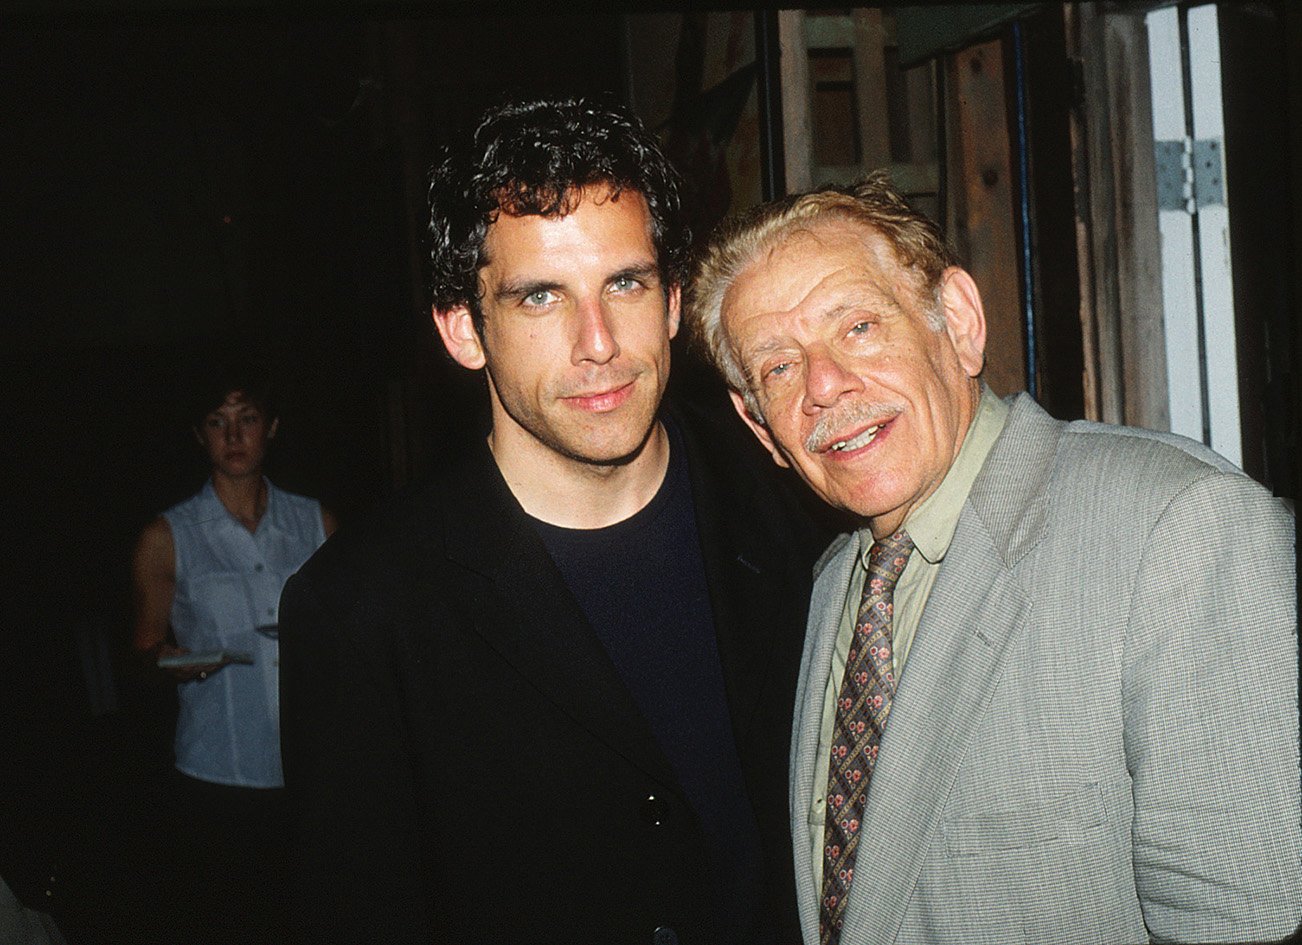 Ben Stiller and Jerry Stiller, attend party hosted by NBC at Sconset Playhouse during the Nantucket Film Festival in 1998 in Nantucket, Massachusetts | Photo: Lindsay Brice/Getty Images